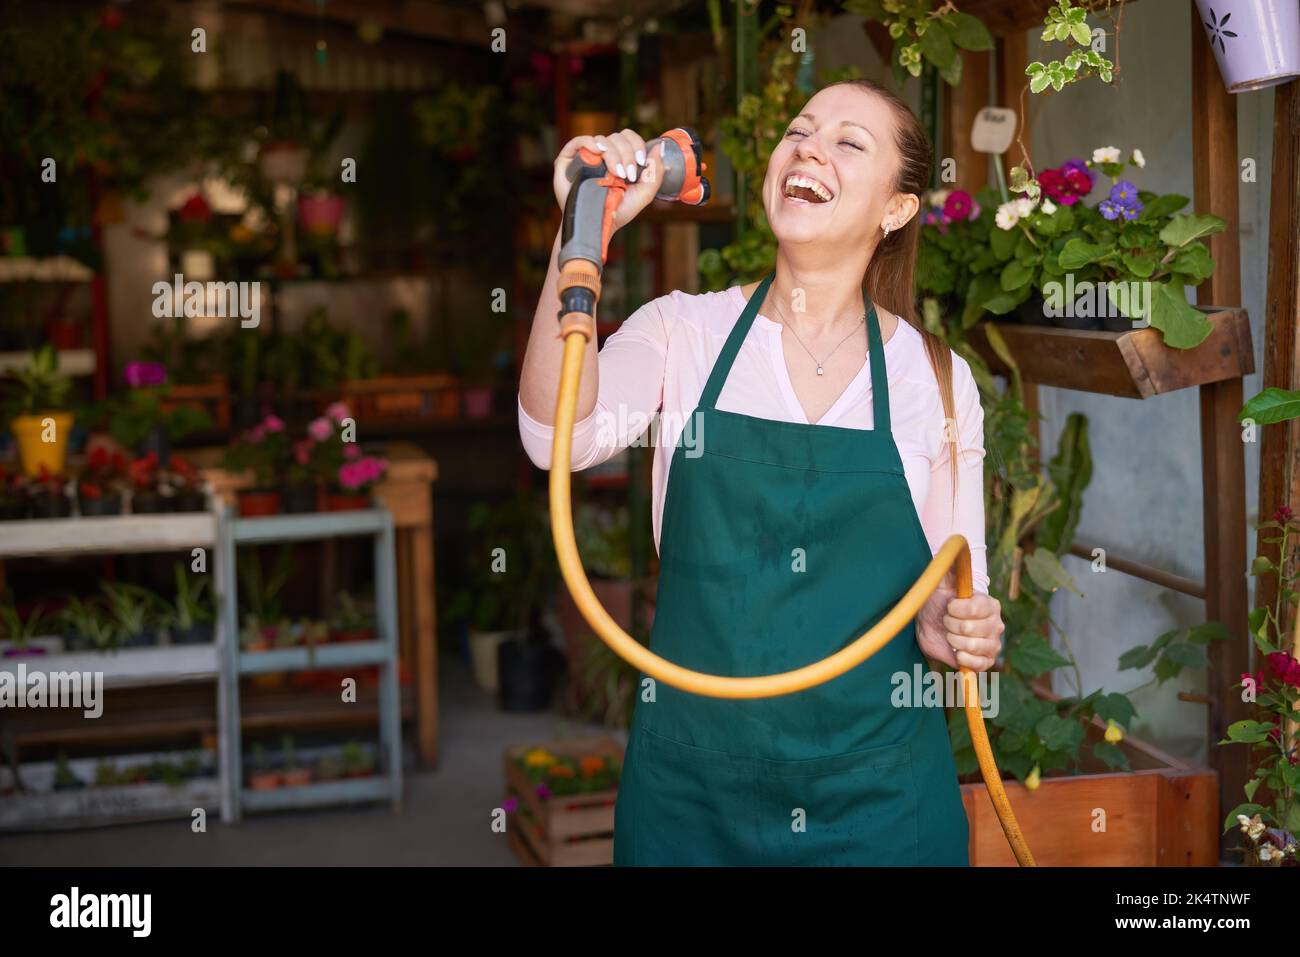 Young florist with garden hose sings out of high spirits and joie de vivre in the flower shop Stock Photo